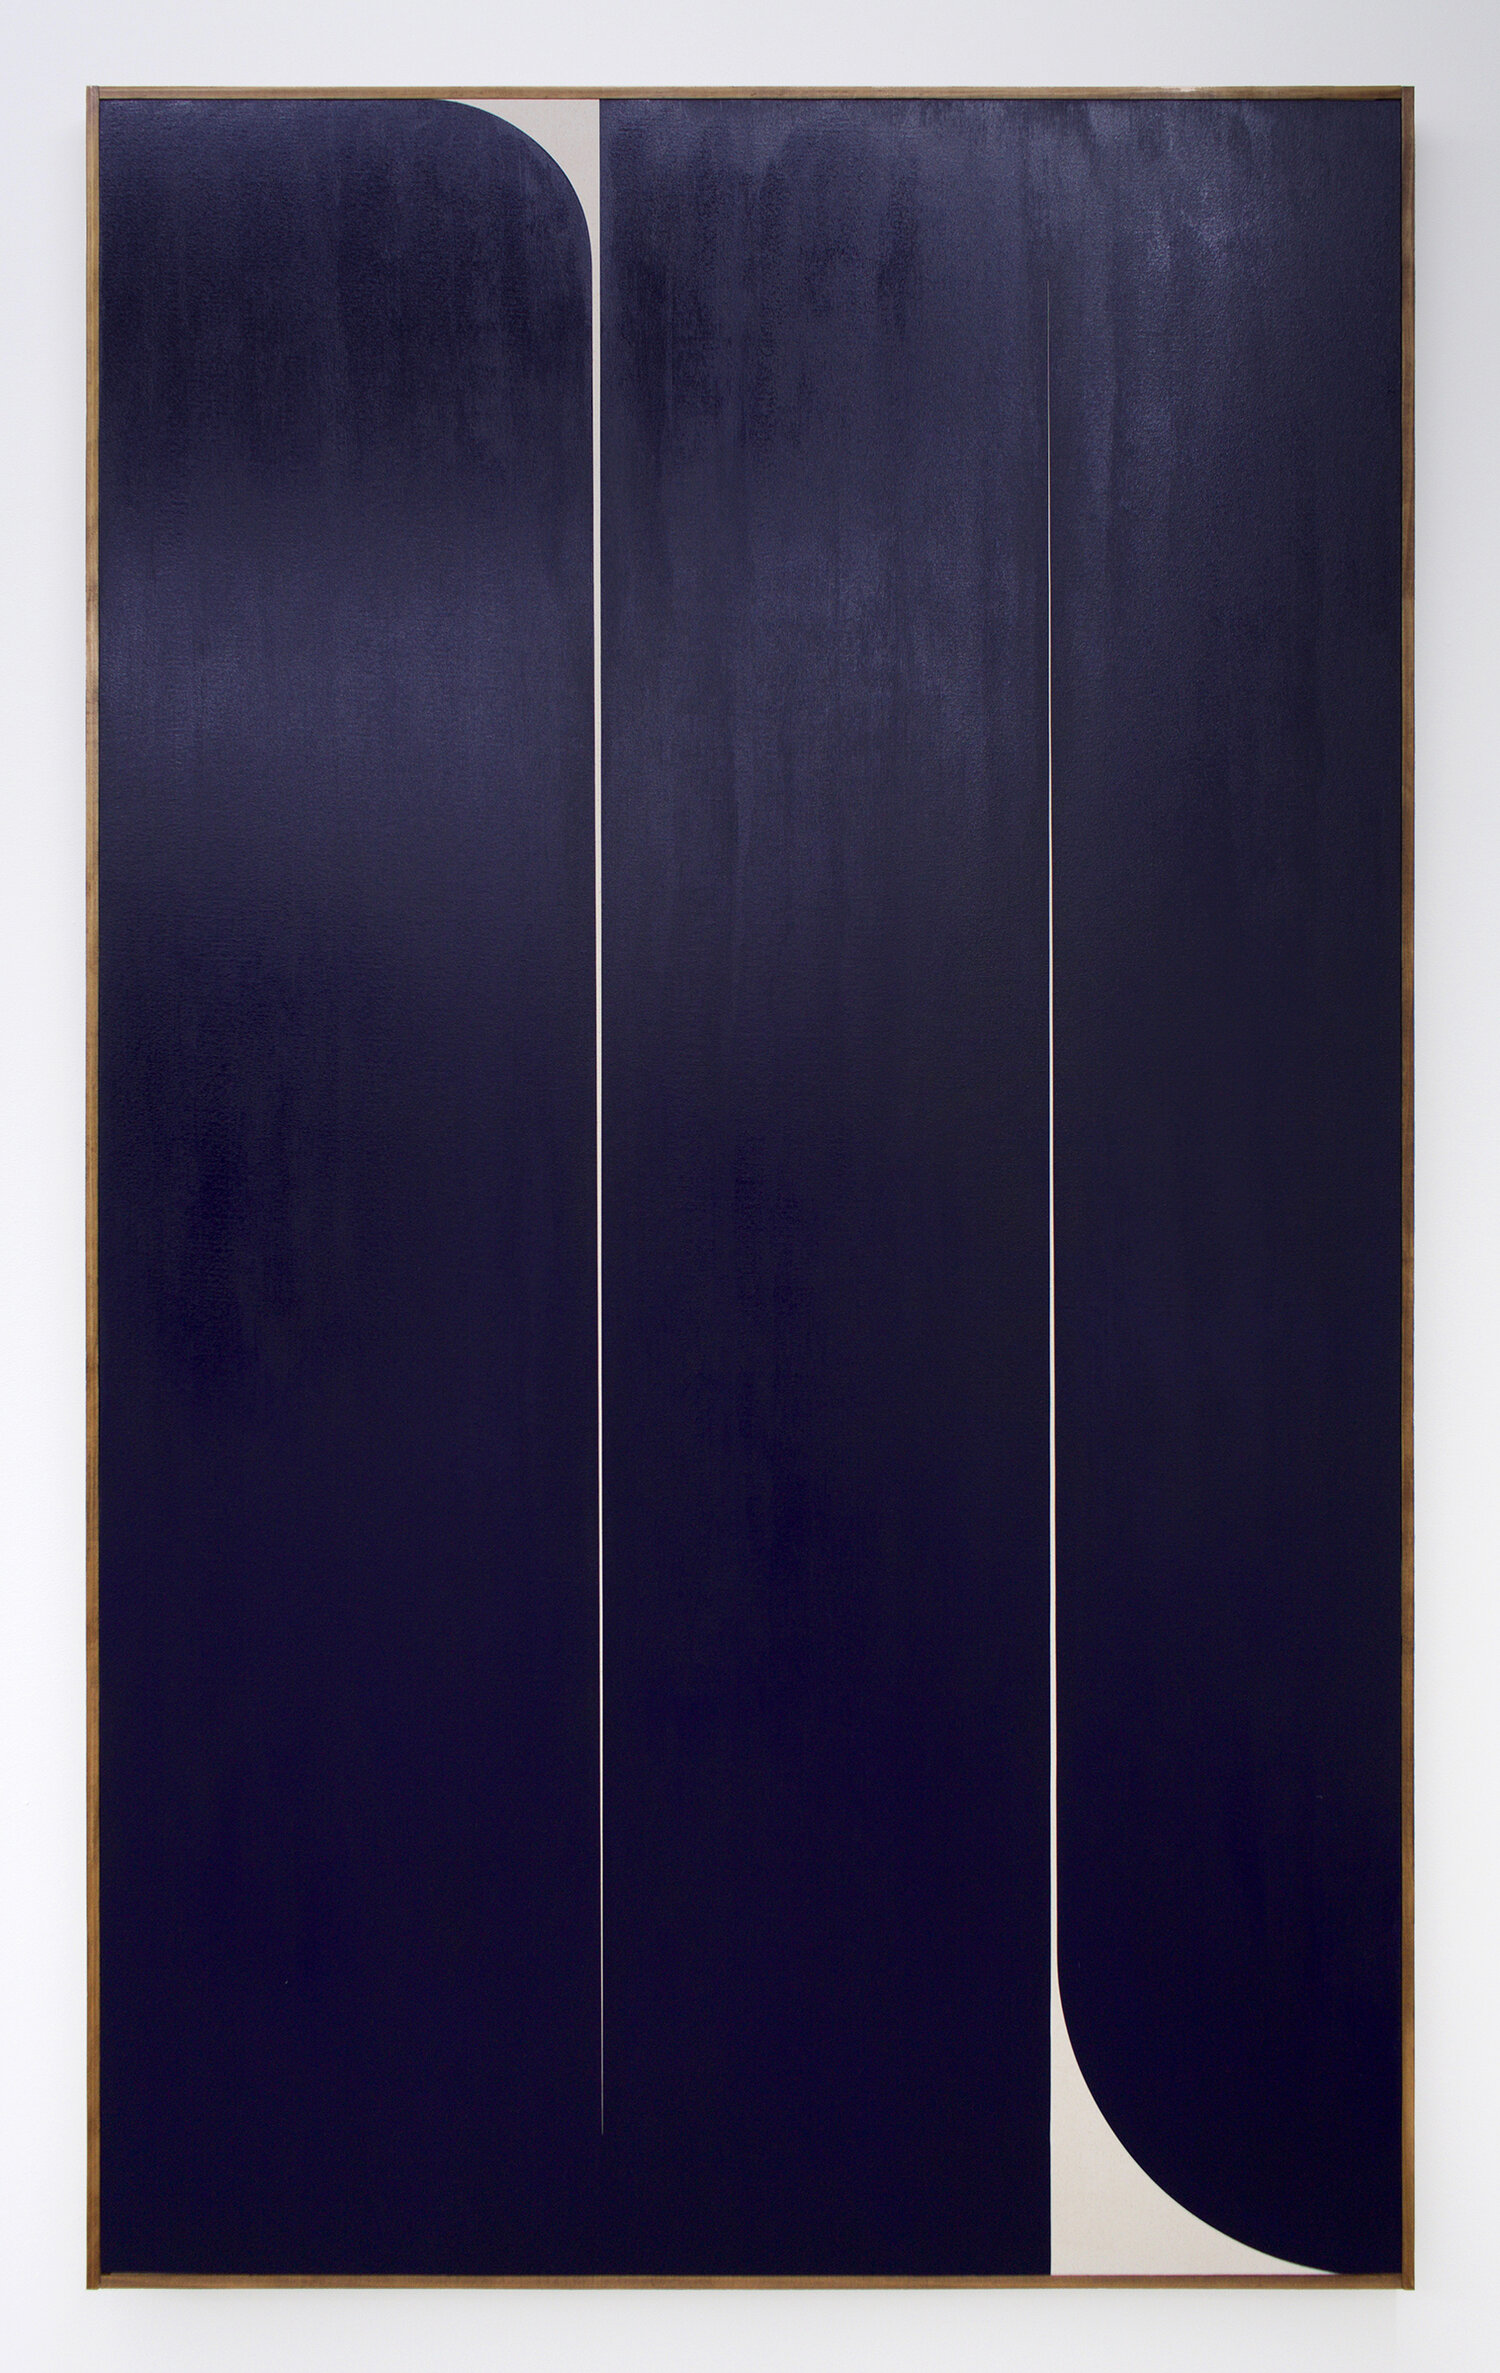  JOHNNY ABRAHAMS Untitled (Blue 2), 2019 oil on canvas, 80” x 48” 